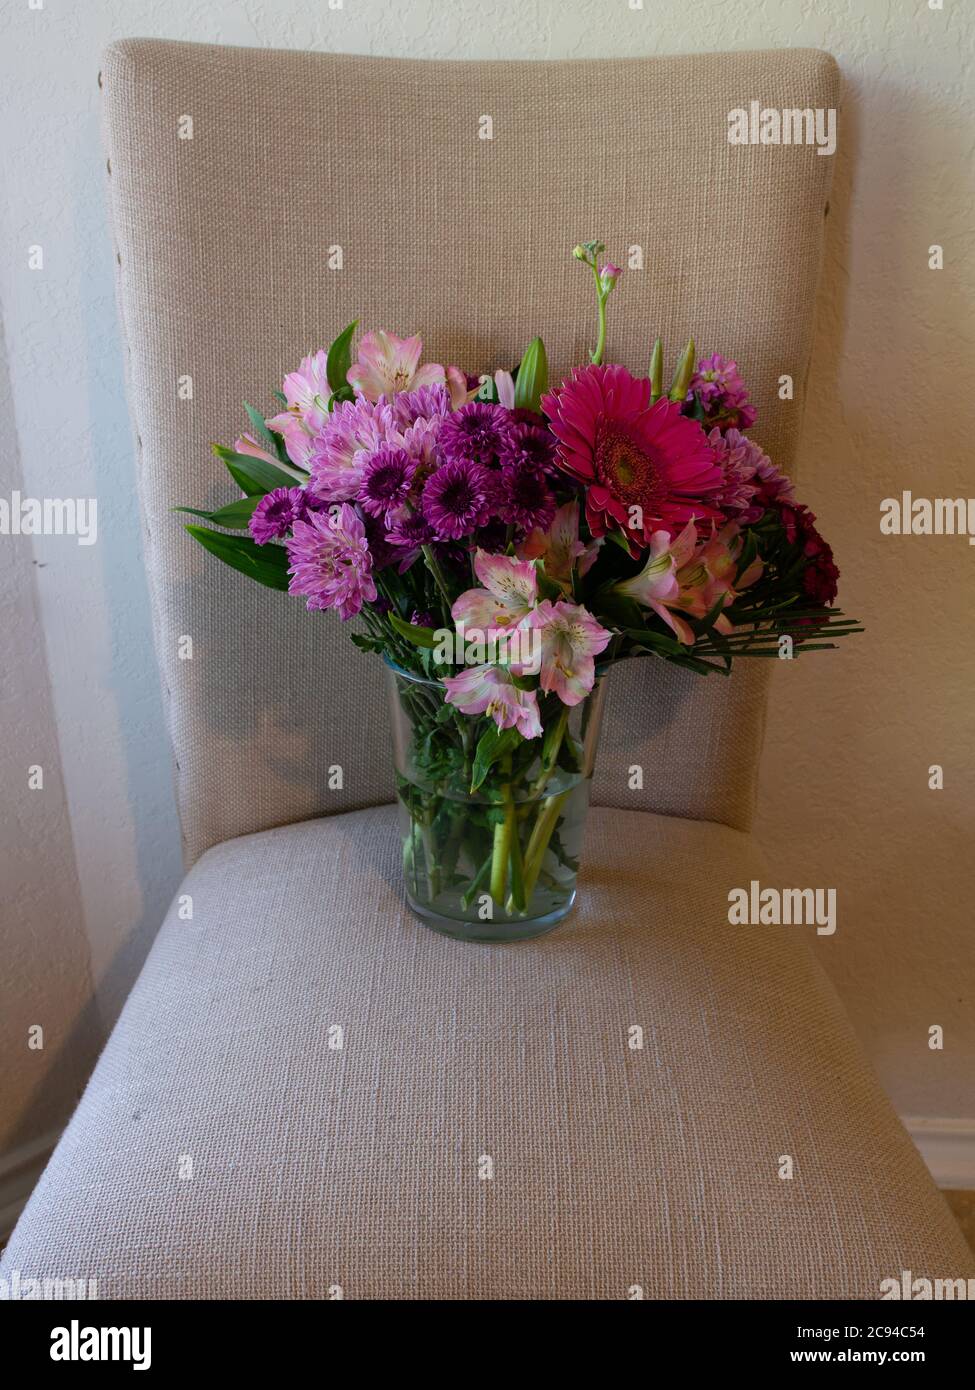 Vase of Flowers on Beige Chair Stock Photo